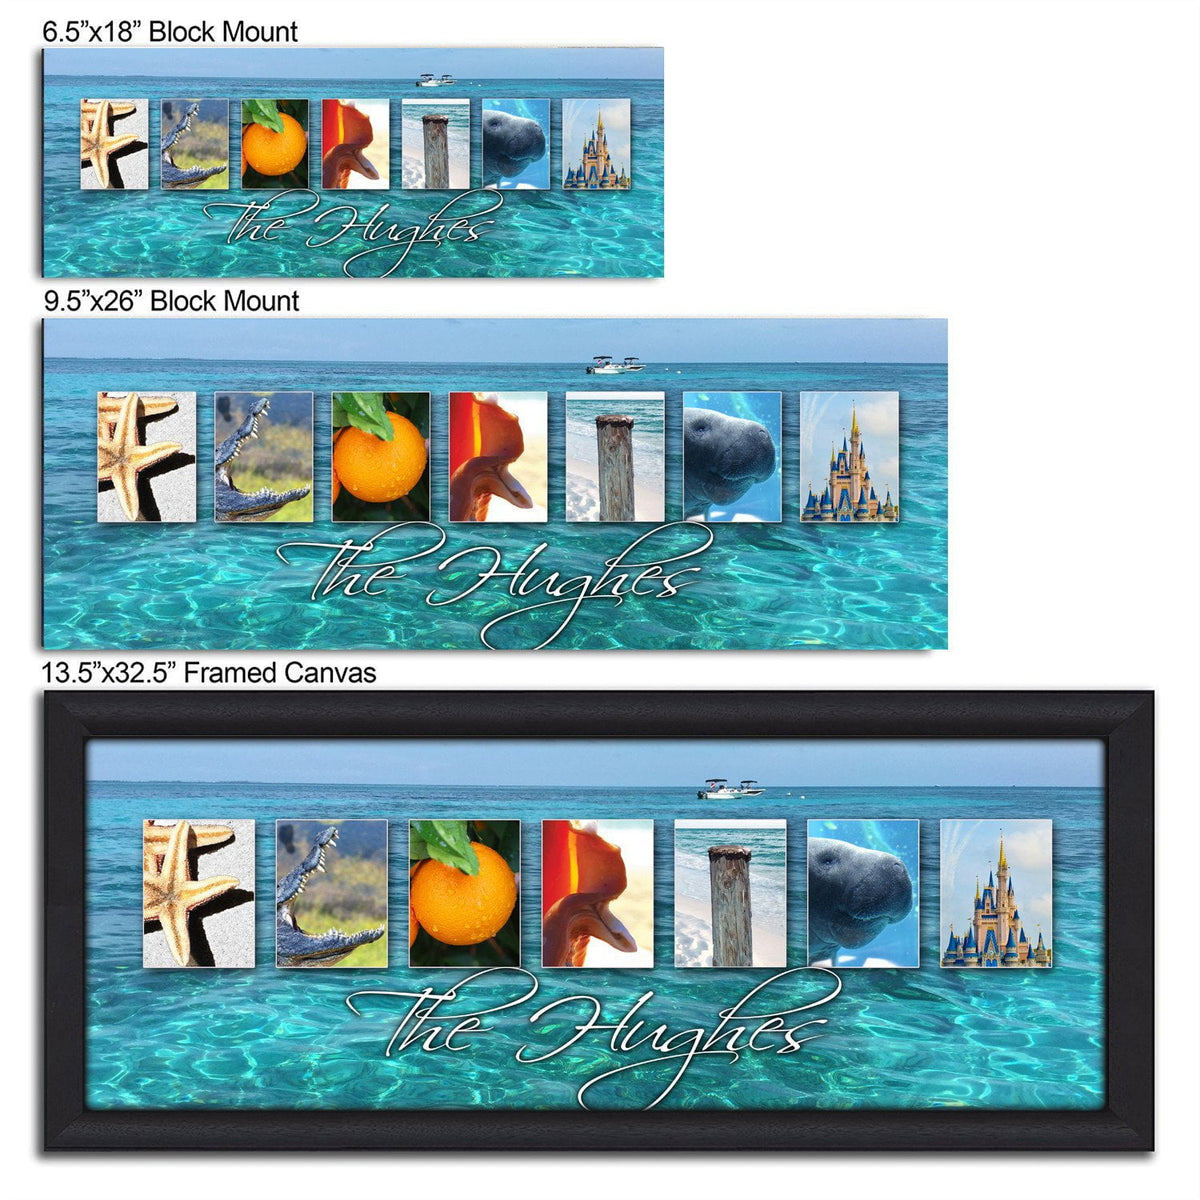 Florida personalized gift size chart from Personal-Prints